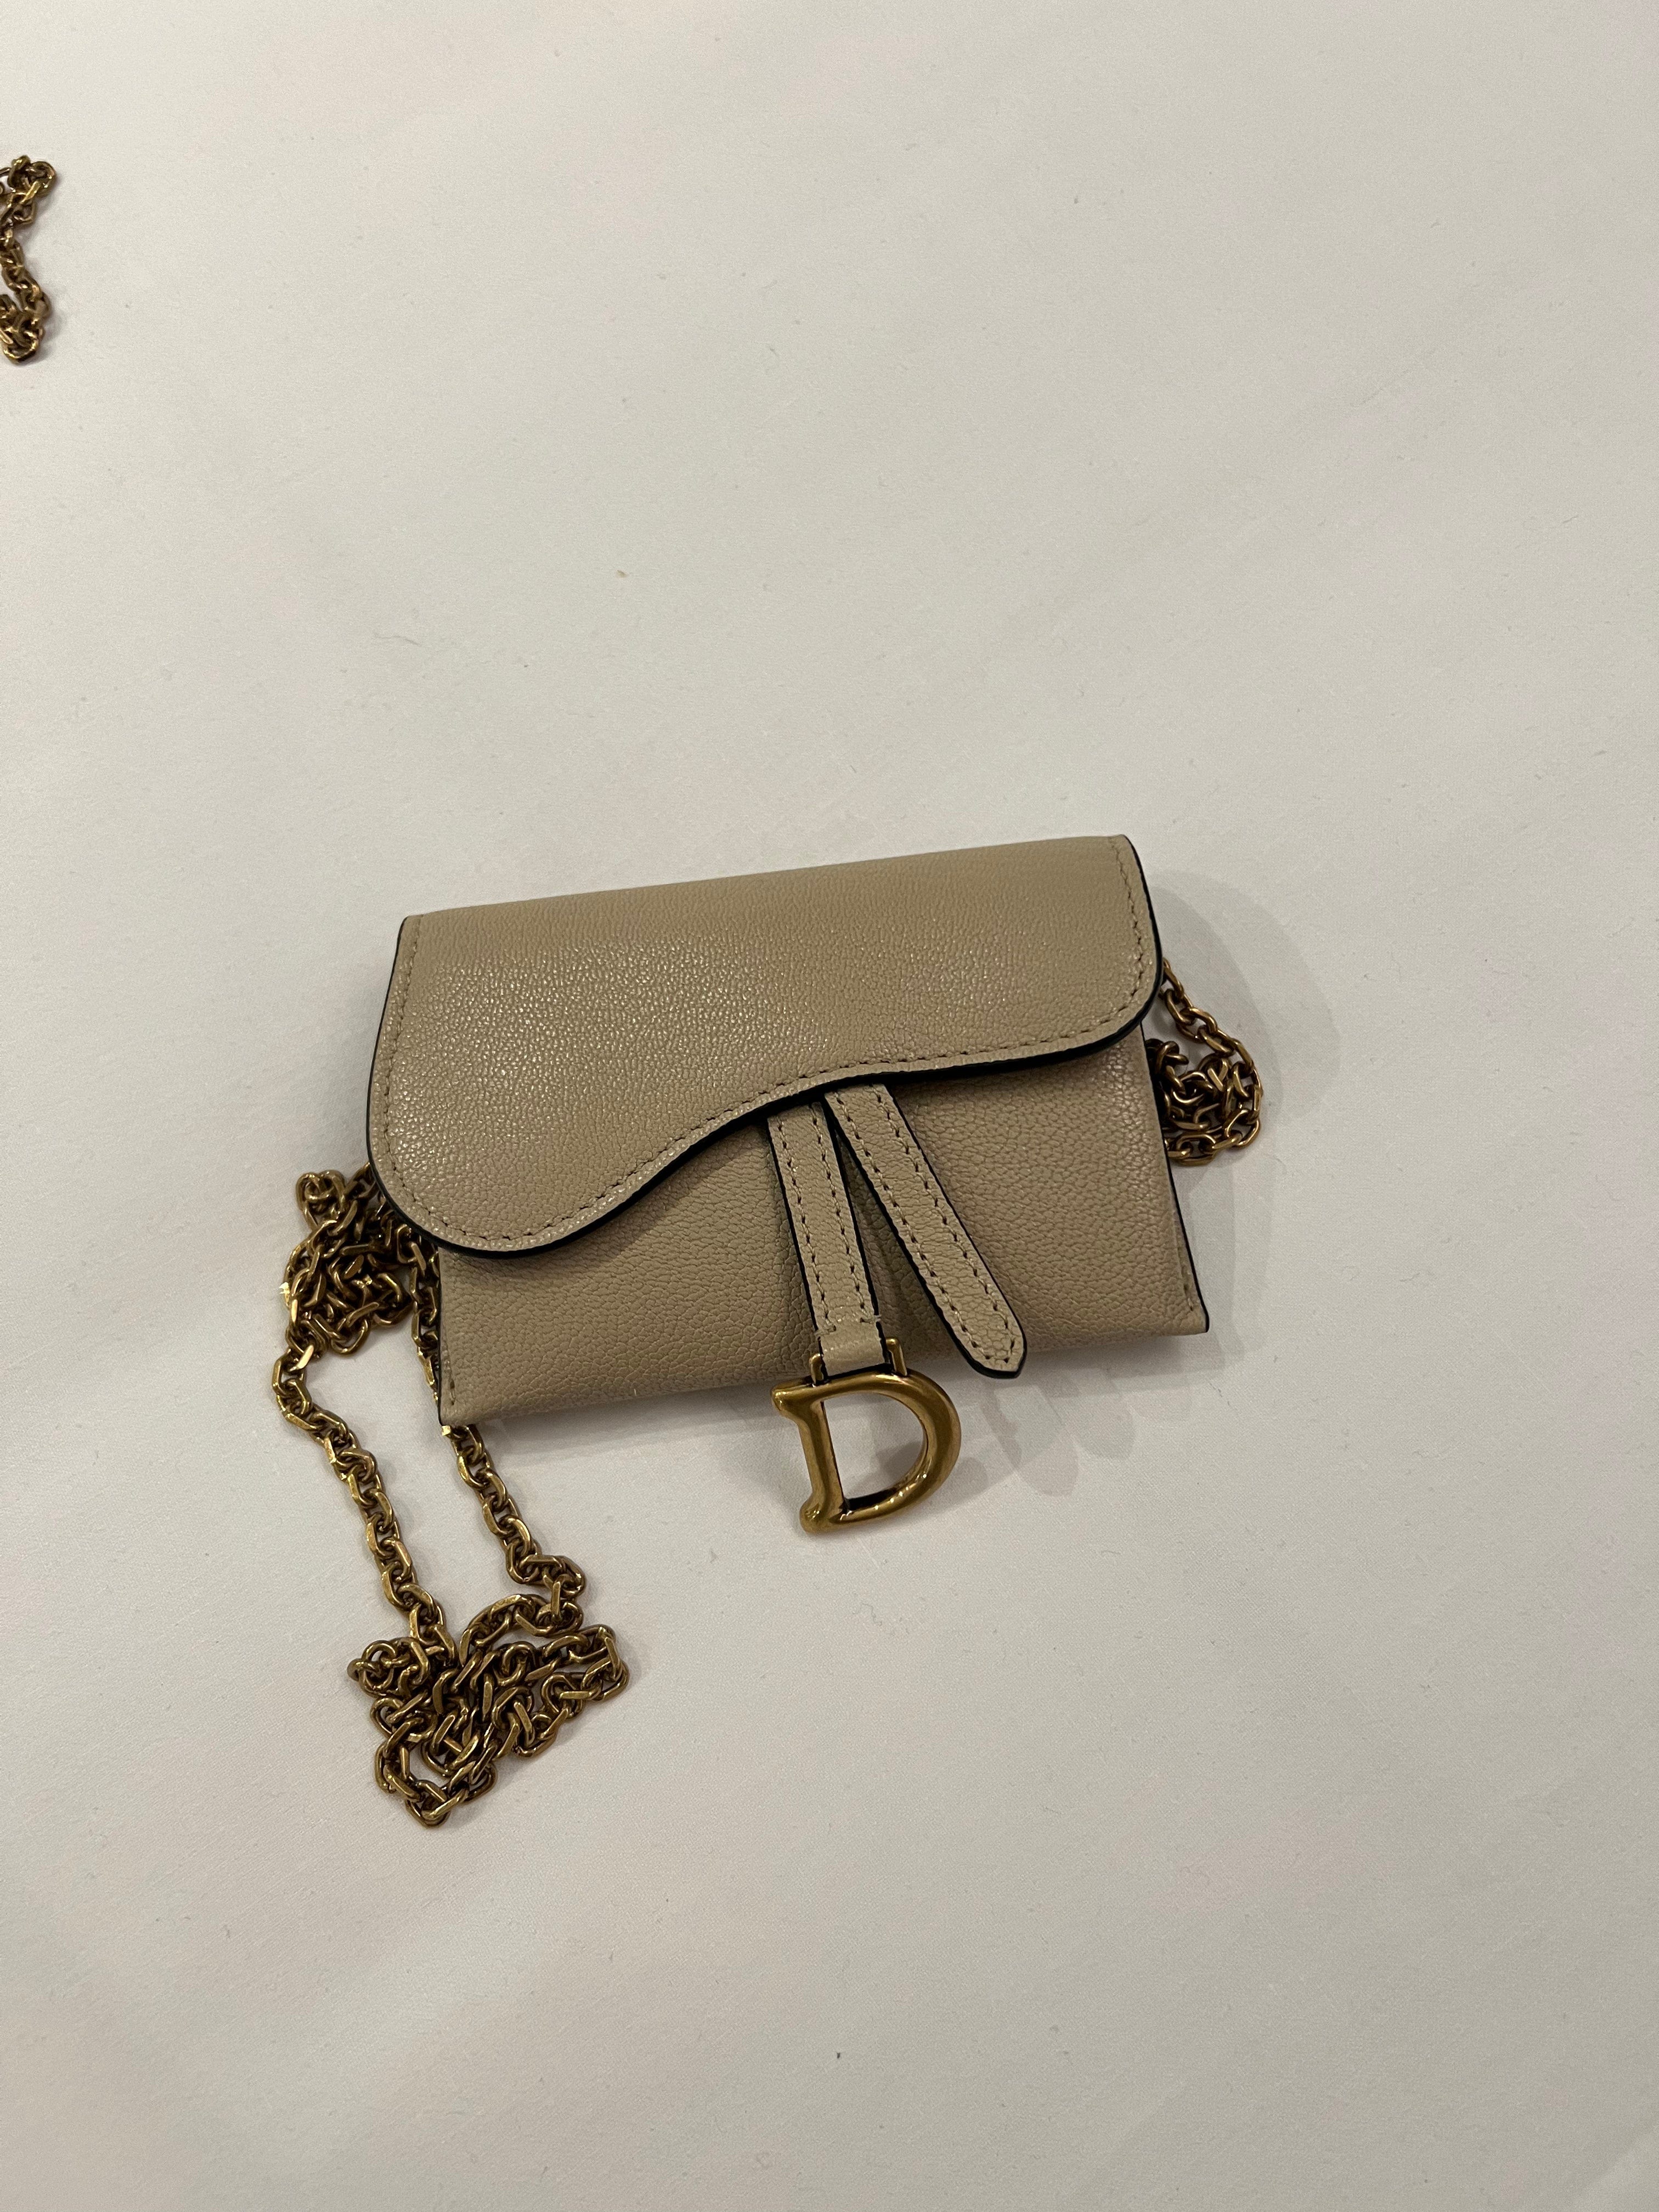 BAG CHAINS YOU NEED FOR YOUR LOUIS VUITTON SLG's 